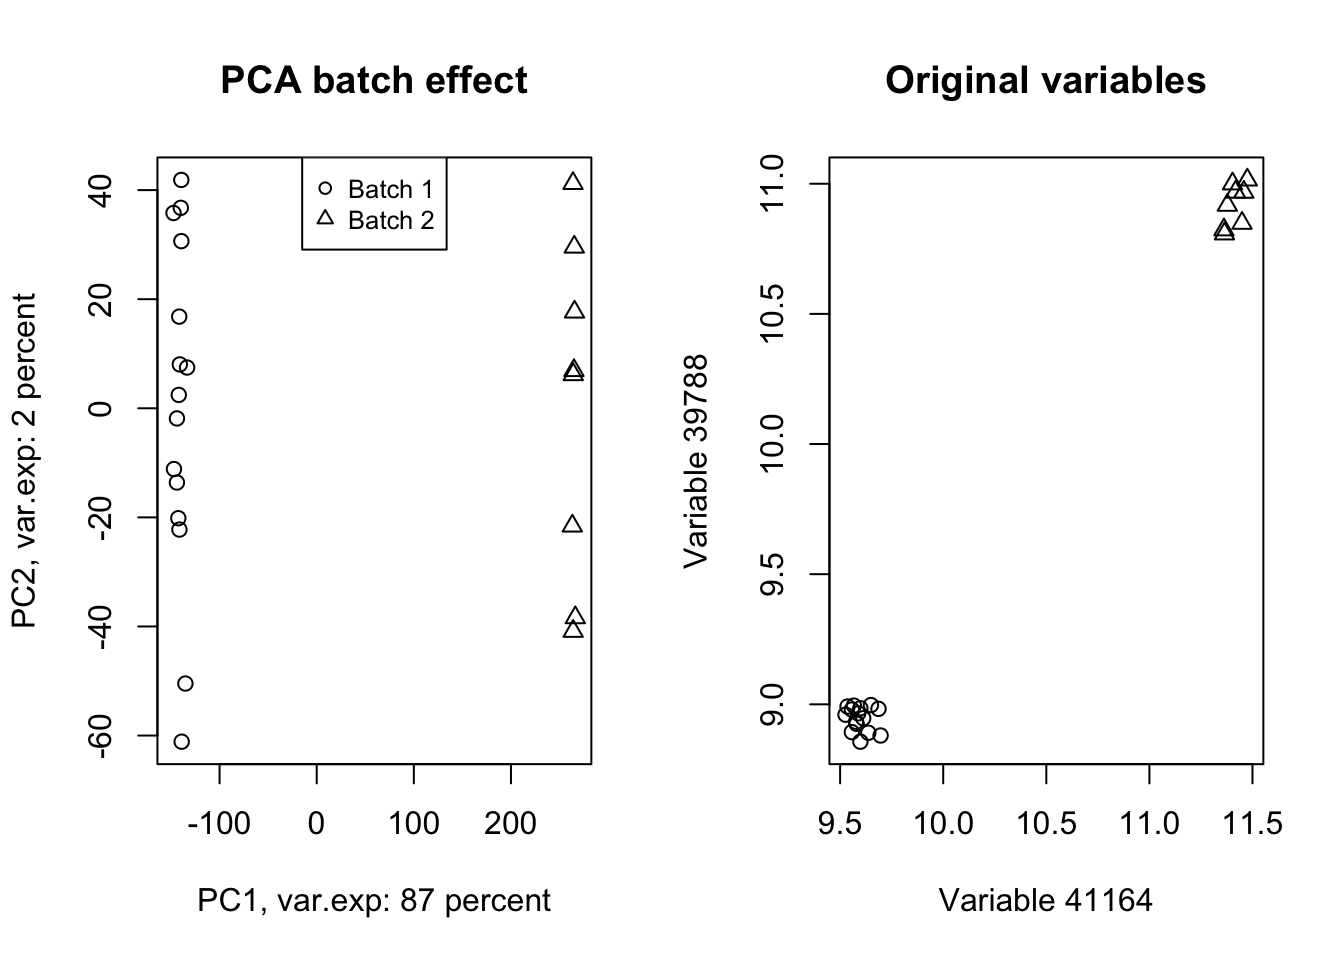 PCA of the data showing the batch effect in our data